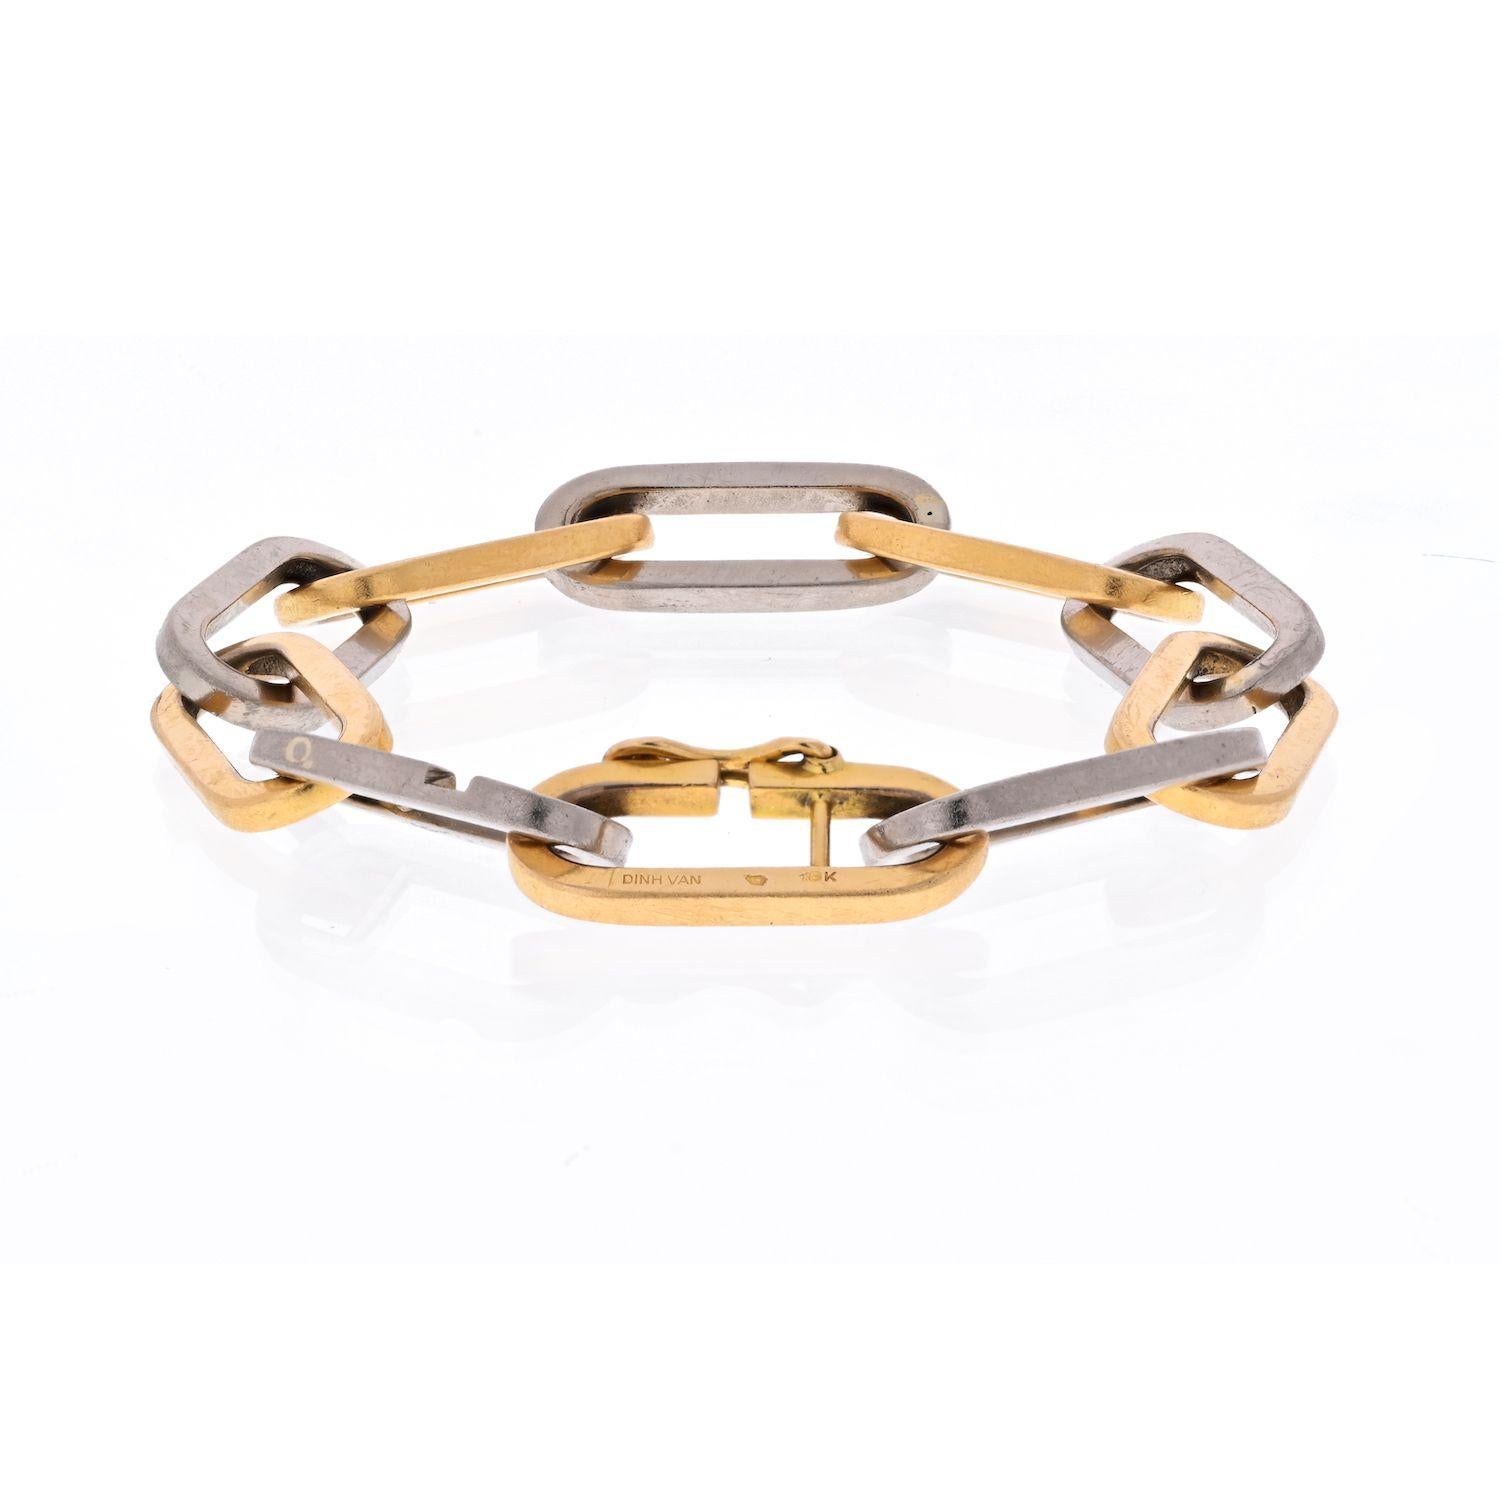 Excellent signed bracelet for a men or a woman, slightly on a larger side. Length: 7.75 inches. 
18K gold. 
Two tone. 